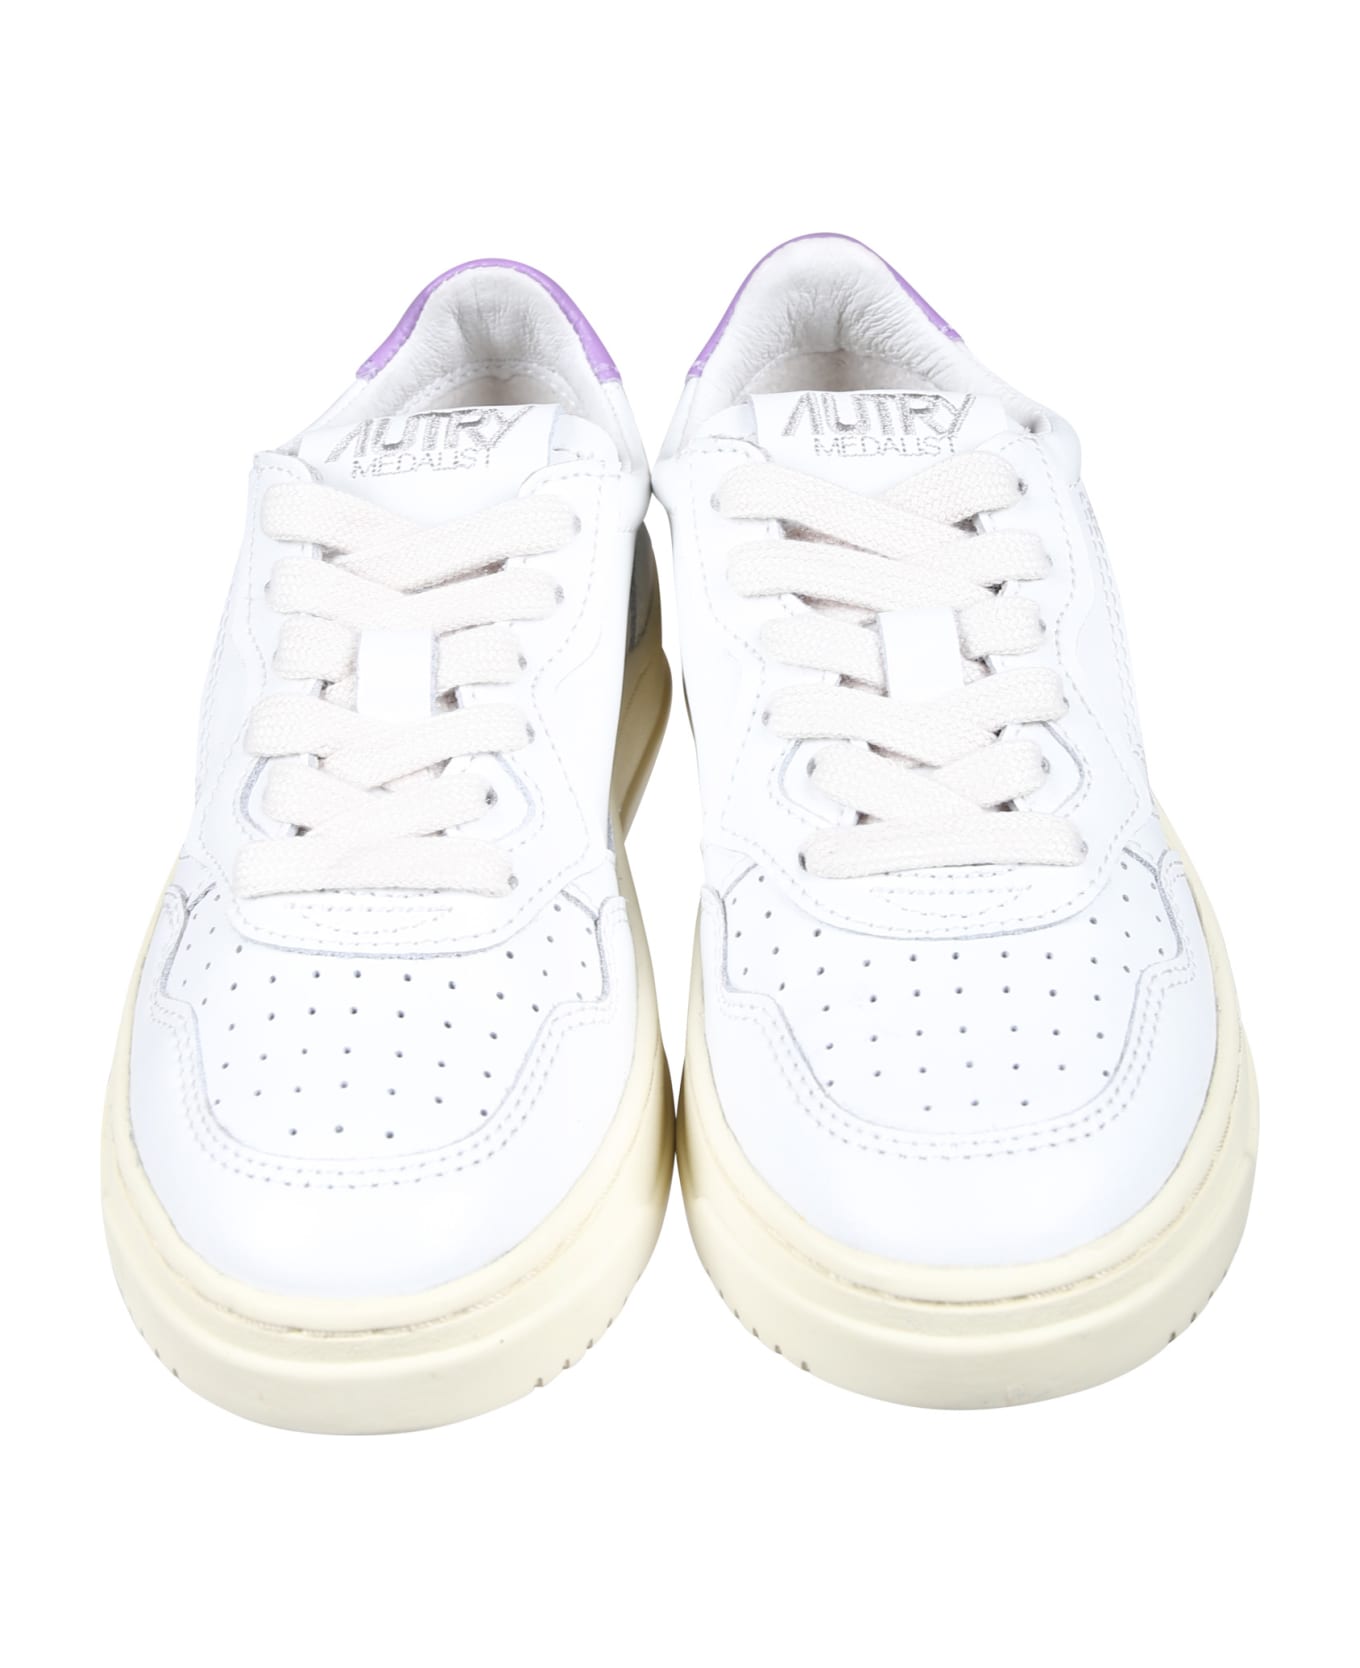 Autry Medalist Low Sneakers For Kids - LILAC